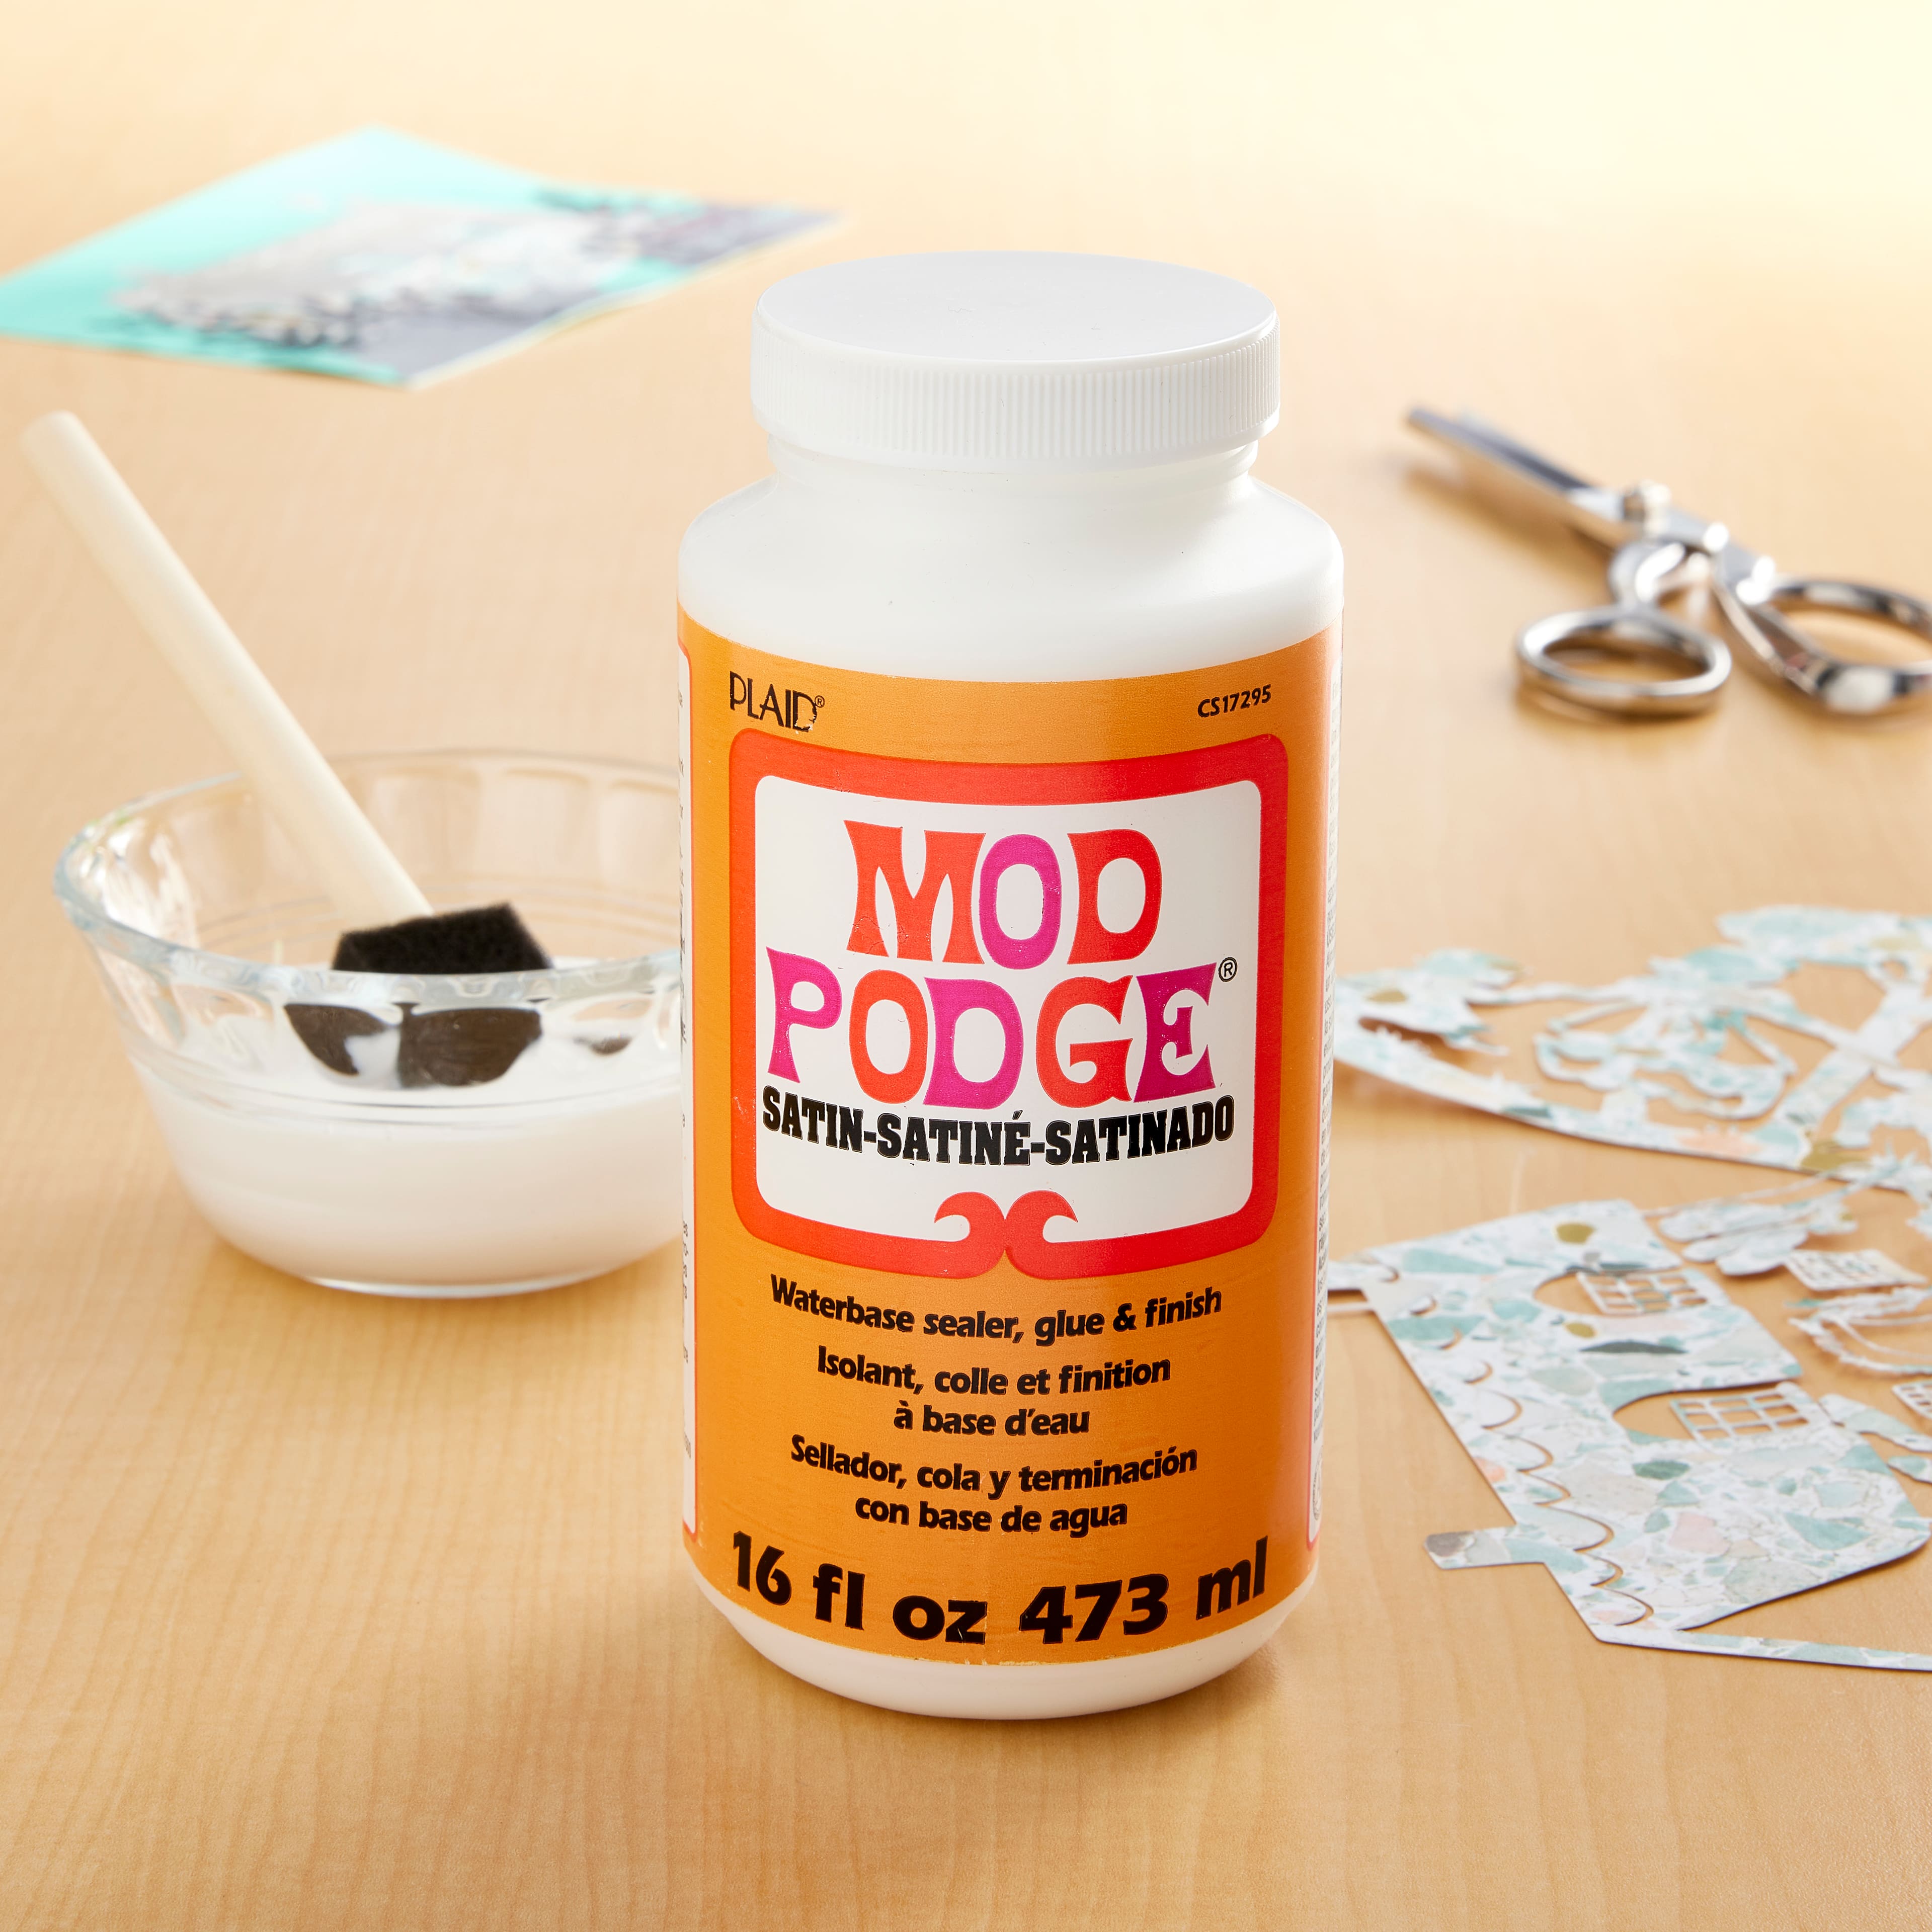 Up To 16% Off on Mod Podge Sealer and Finish